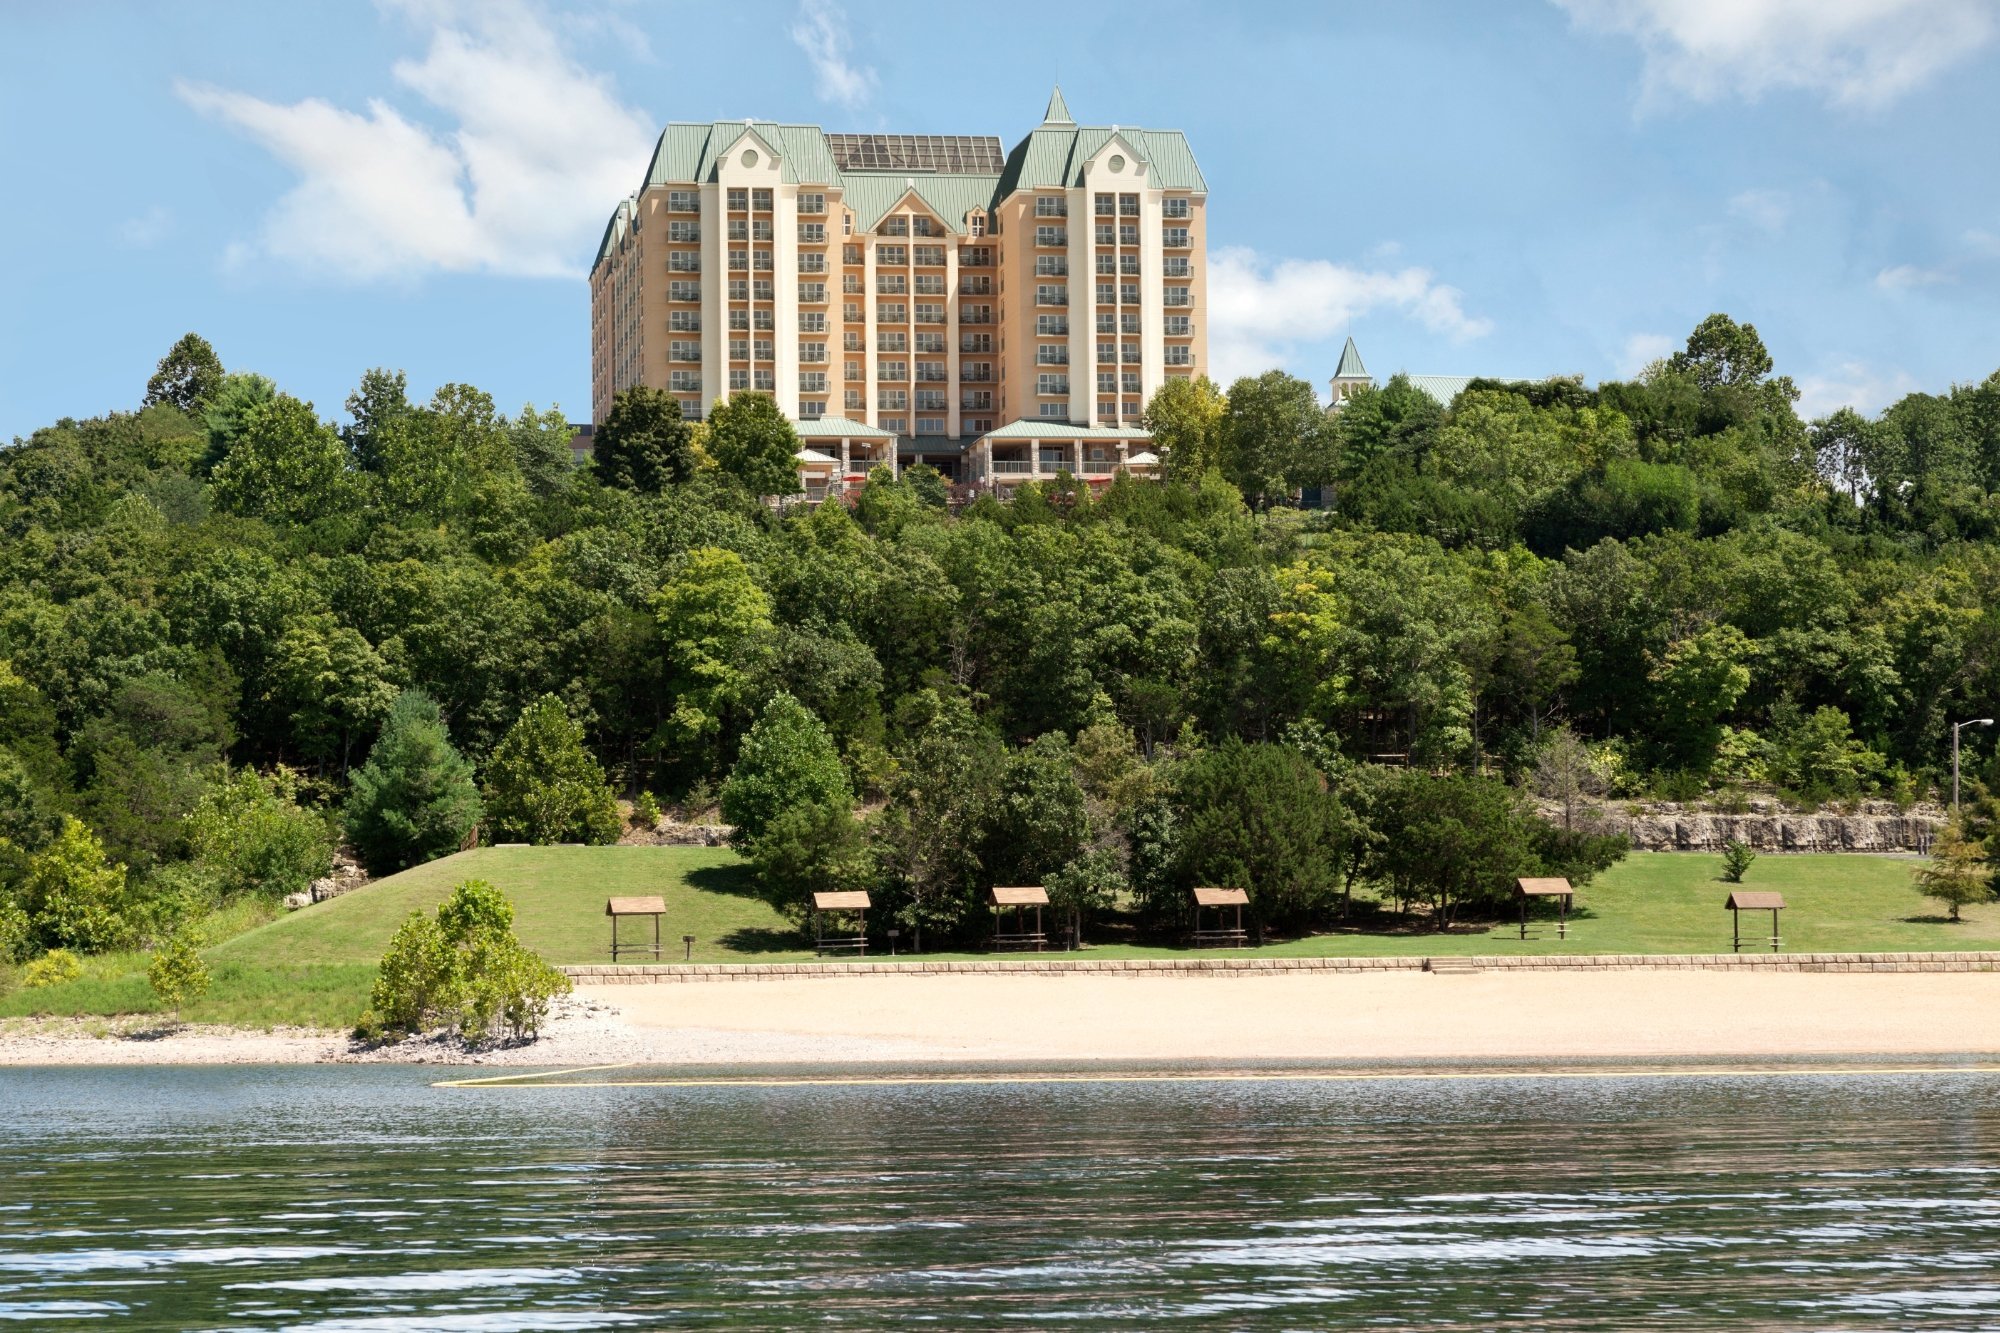 Photo of Chateau on the Lake Resort Spa & Convention Center, Branson, MO